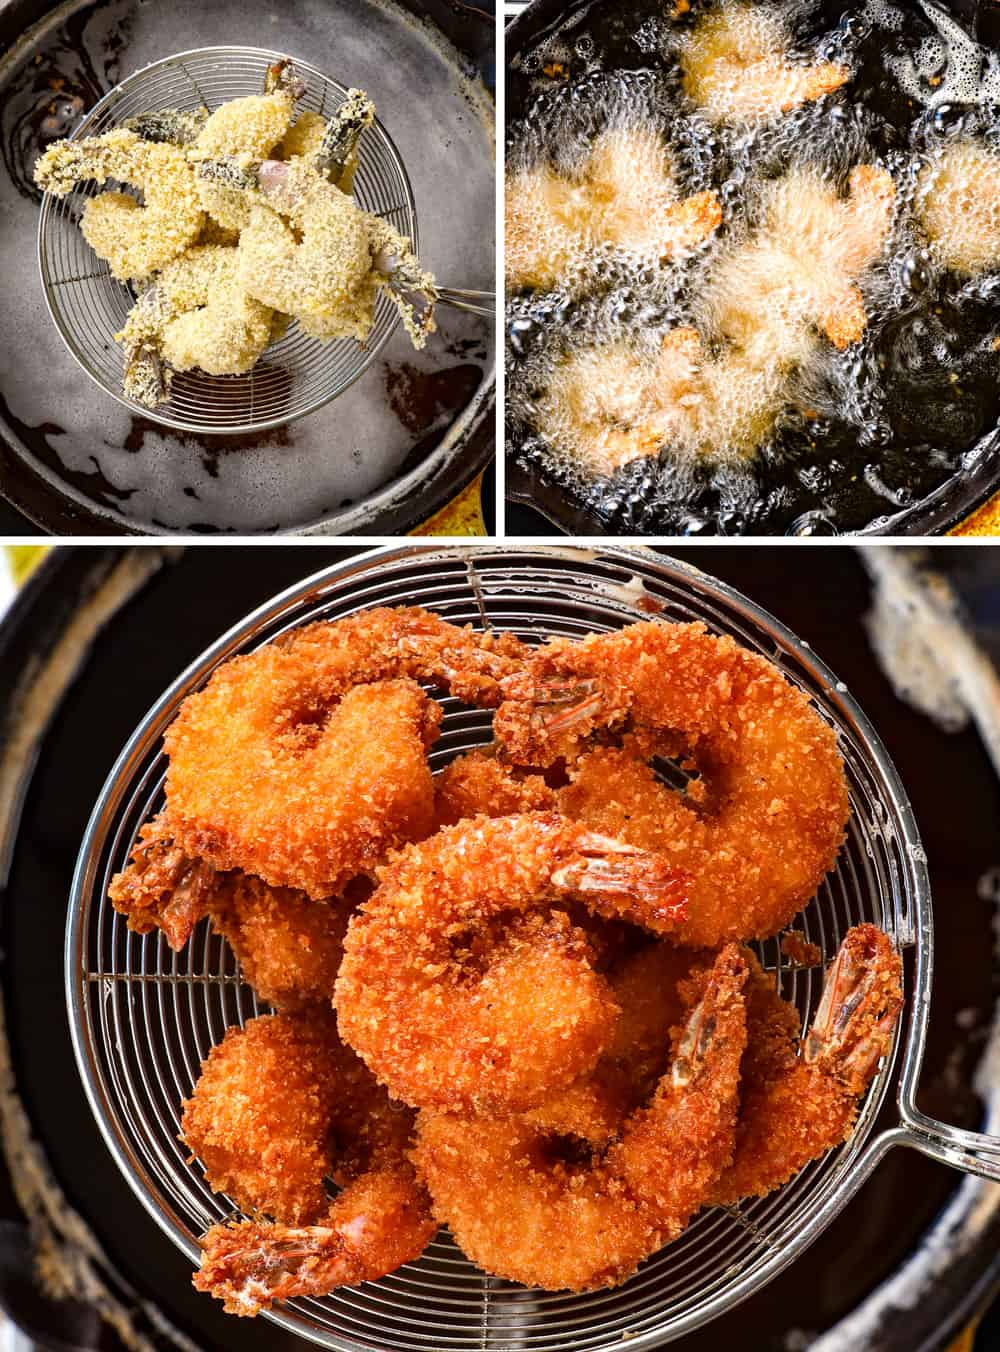 a collage showing how to make firecracker shrimp by deep frying in oil until golden and crispy